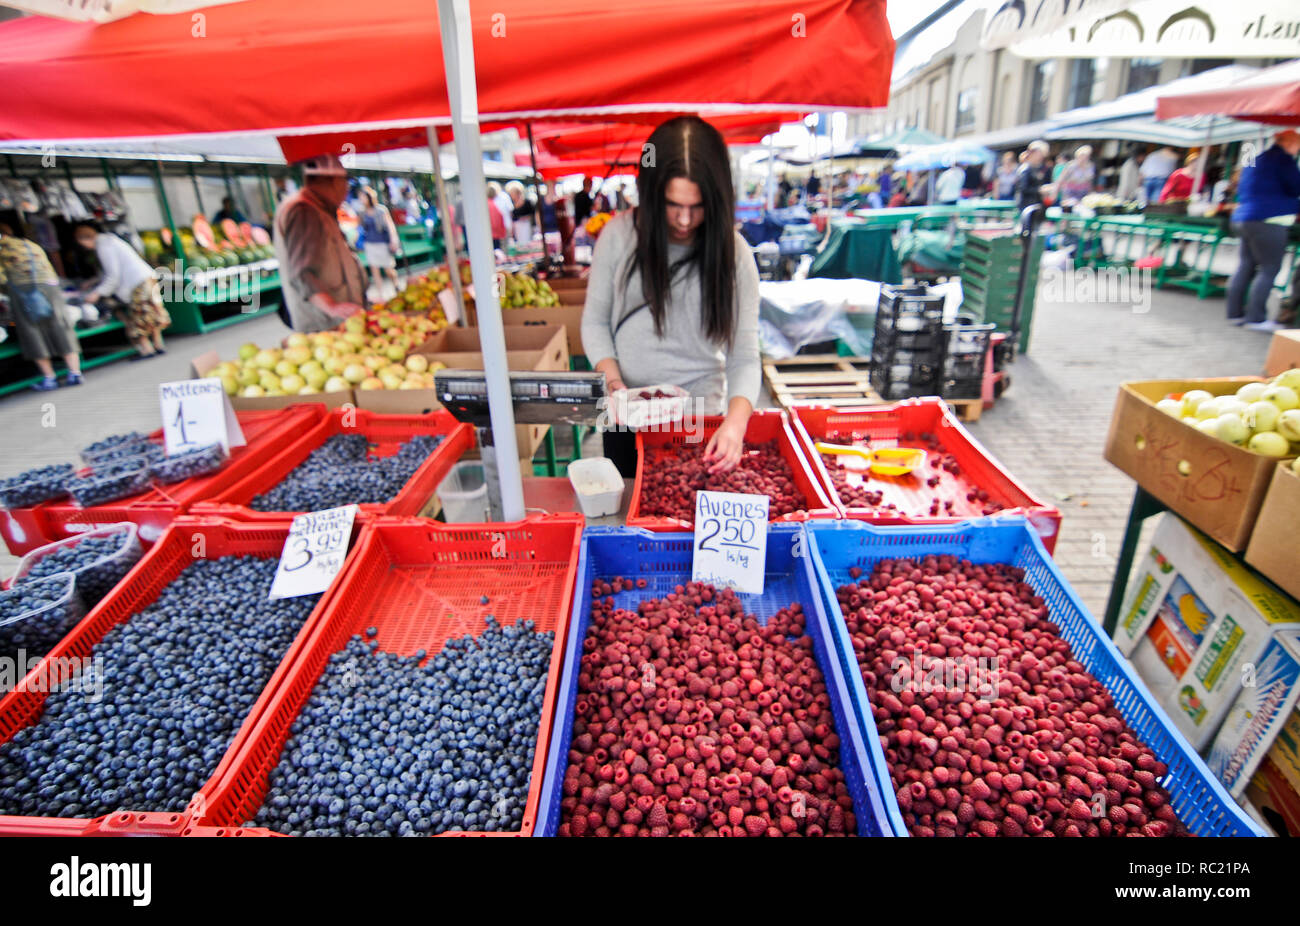 Black berries and red berries. Riga Central Market (Centraltirgus), Latvia Stock Photo